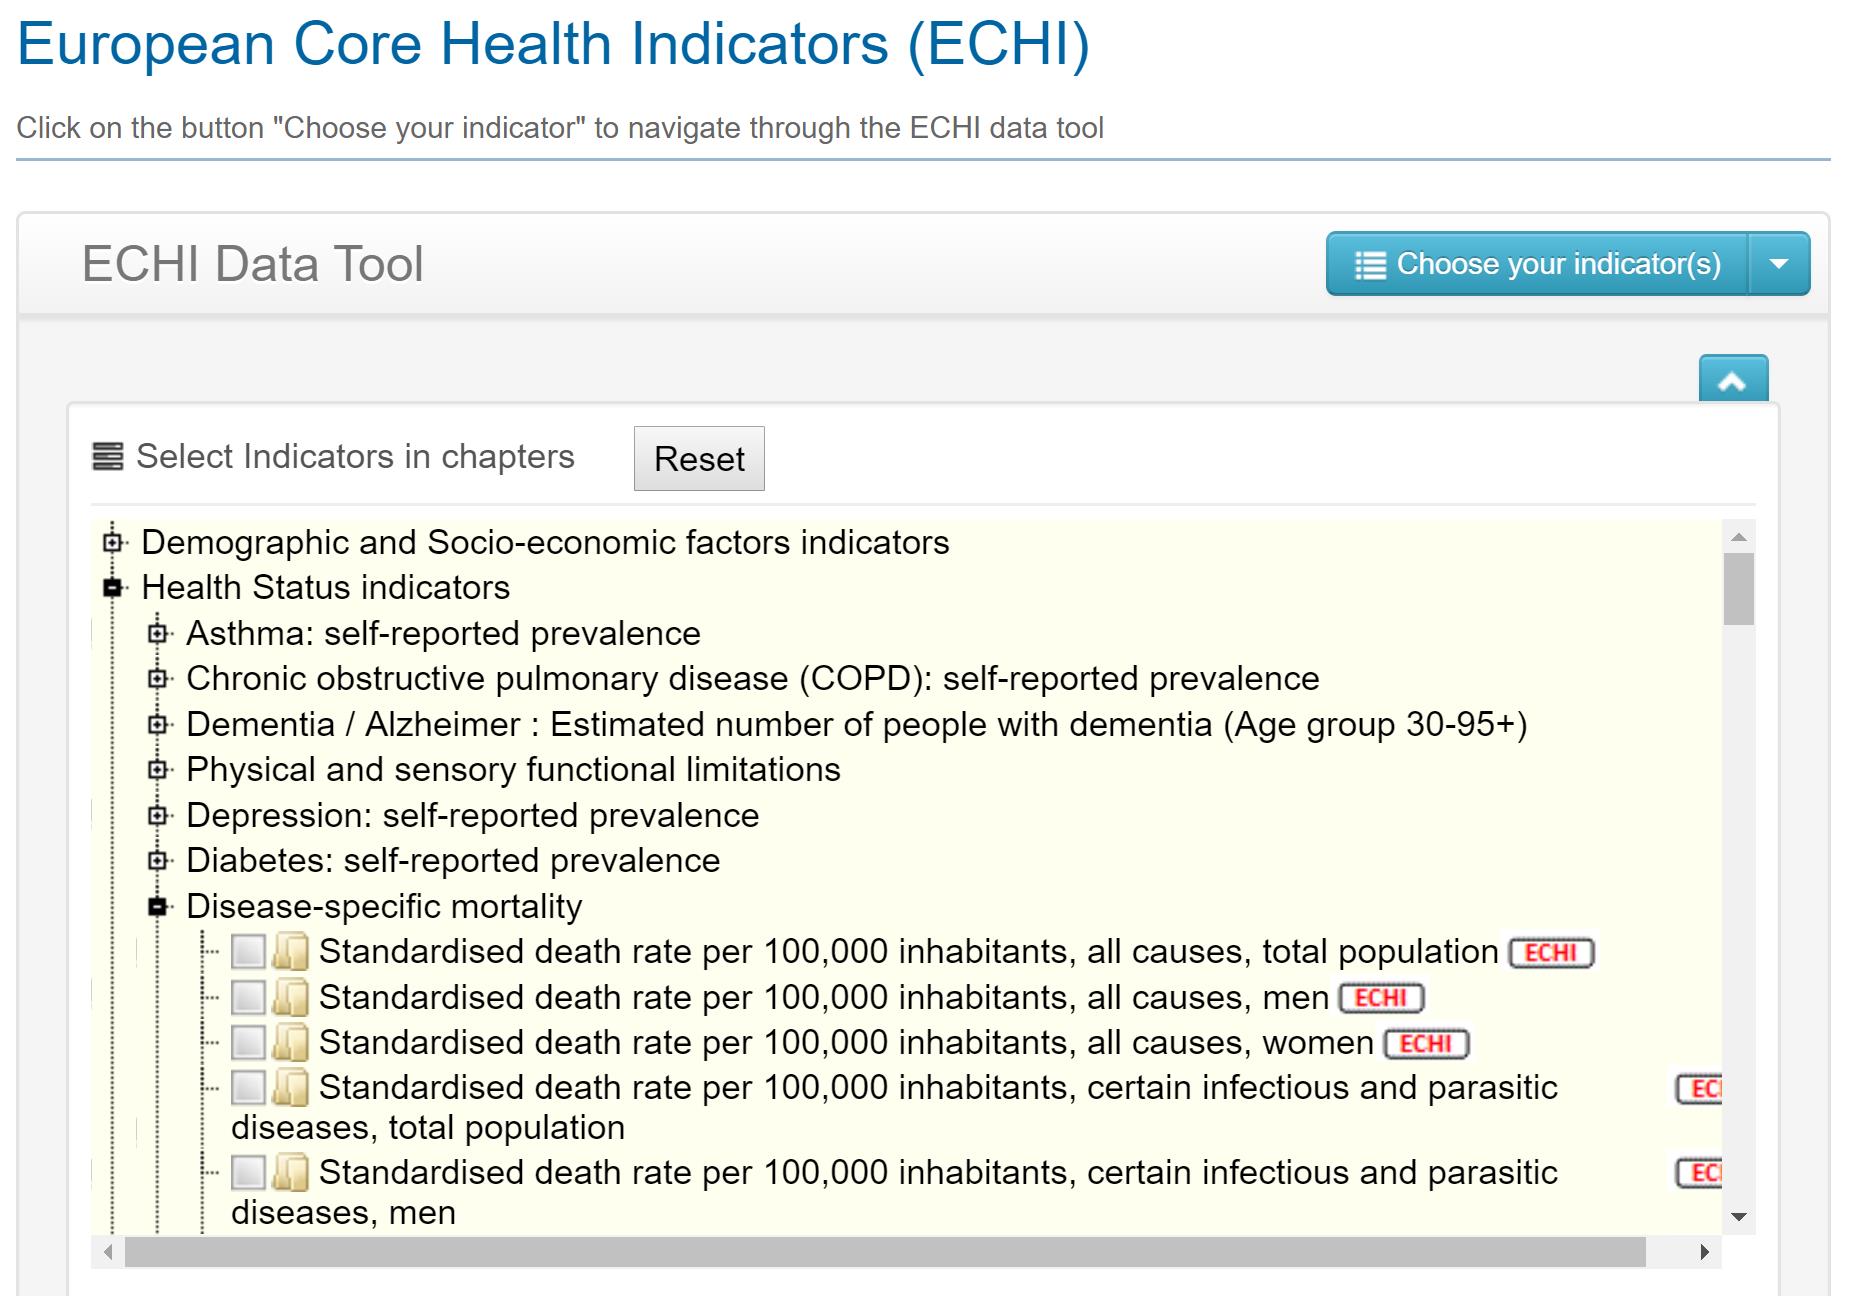 Screenshot similar to the image above. The second chapter of the four, Health Status indicators, has a mark you can click on to get its sub-categories, in which the seventh is Disease-specific mortality.